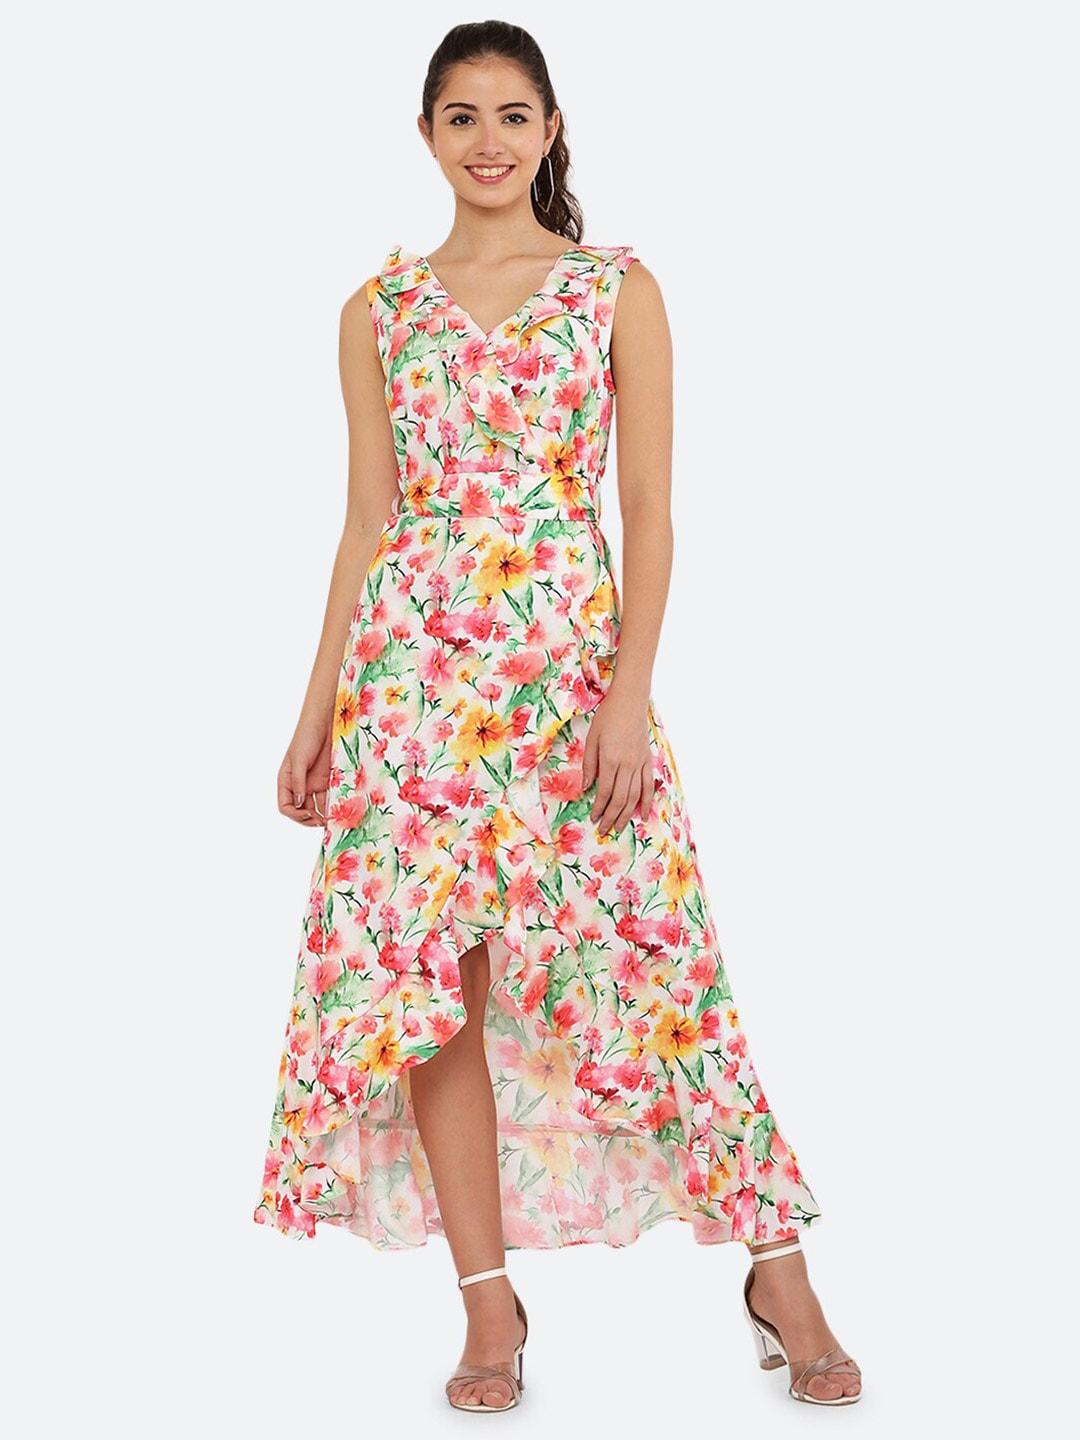 raassio-off-white-&-pink-floral-crepe-maxi-dress